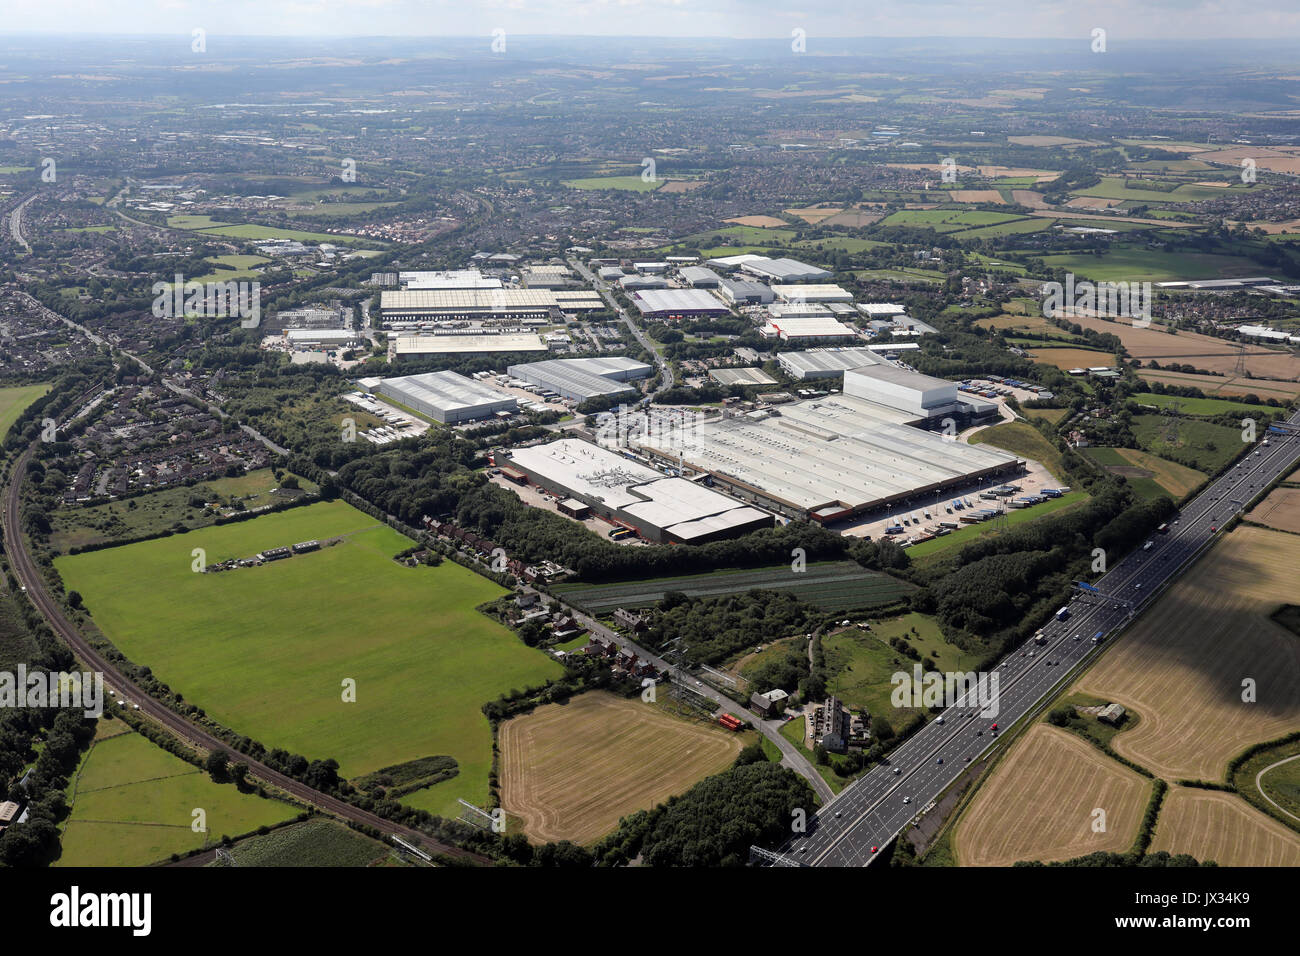 aerial view of Wakefield Industrial Estate with Coca Cola factory prominent, UK Stock Photo